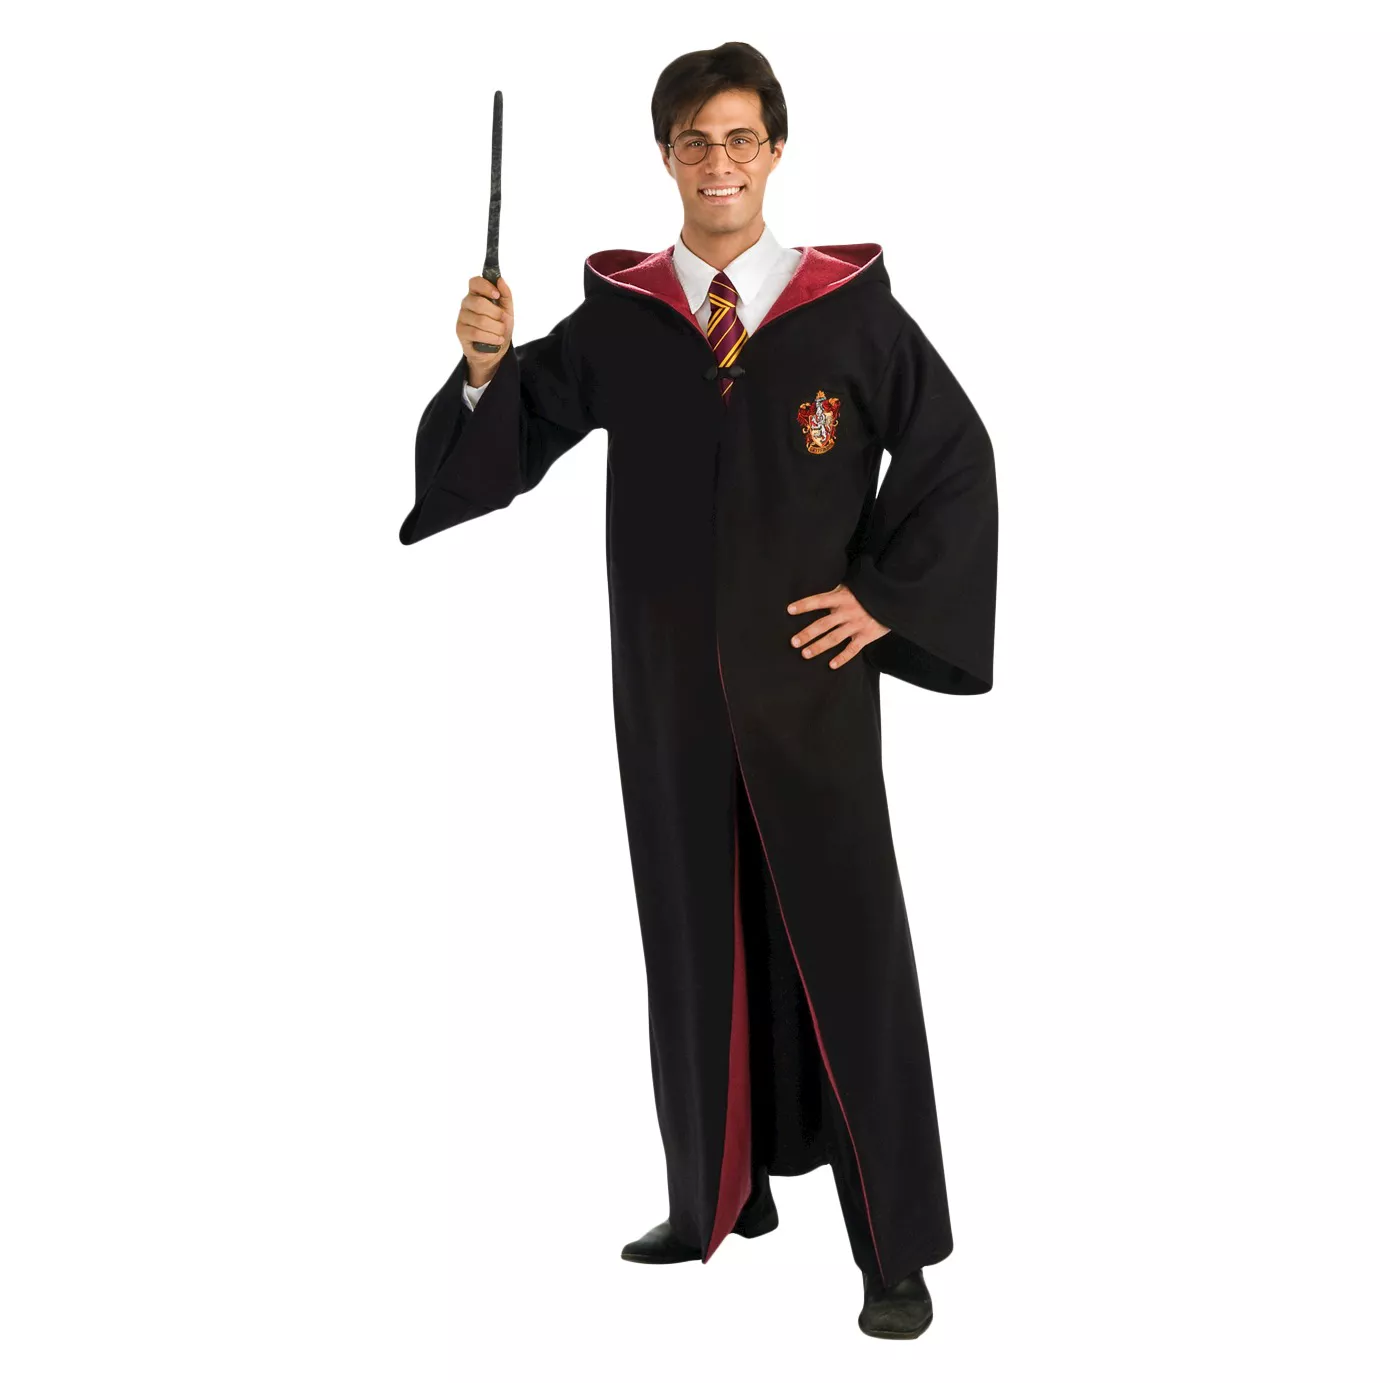 Harry Potter Men's Deluxe Standard Costume One Size - image 1 of 1